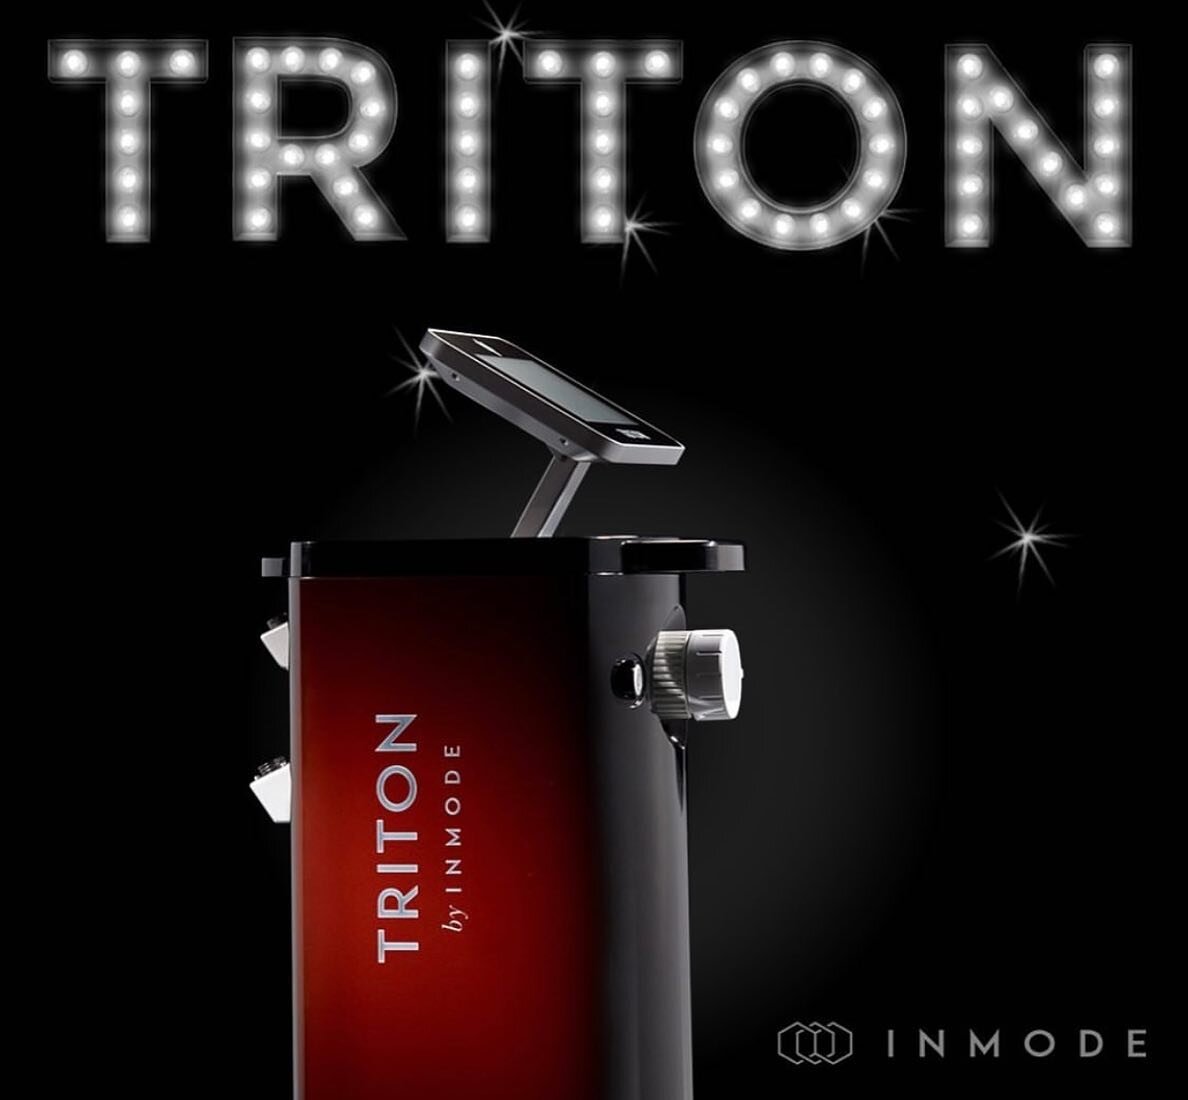 Our laser hair removal device, triton by inmode⚡️

Our technology is the most advanced on the market🏅

Triton offers 3 wavelengths: Diode, Alexandrite, Nd:YAG. What makes triton stand out from other devices on the market is that it uses fusion techn